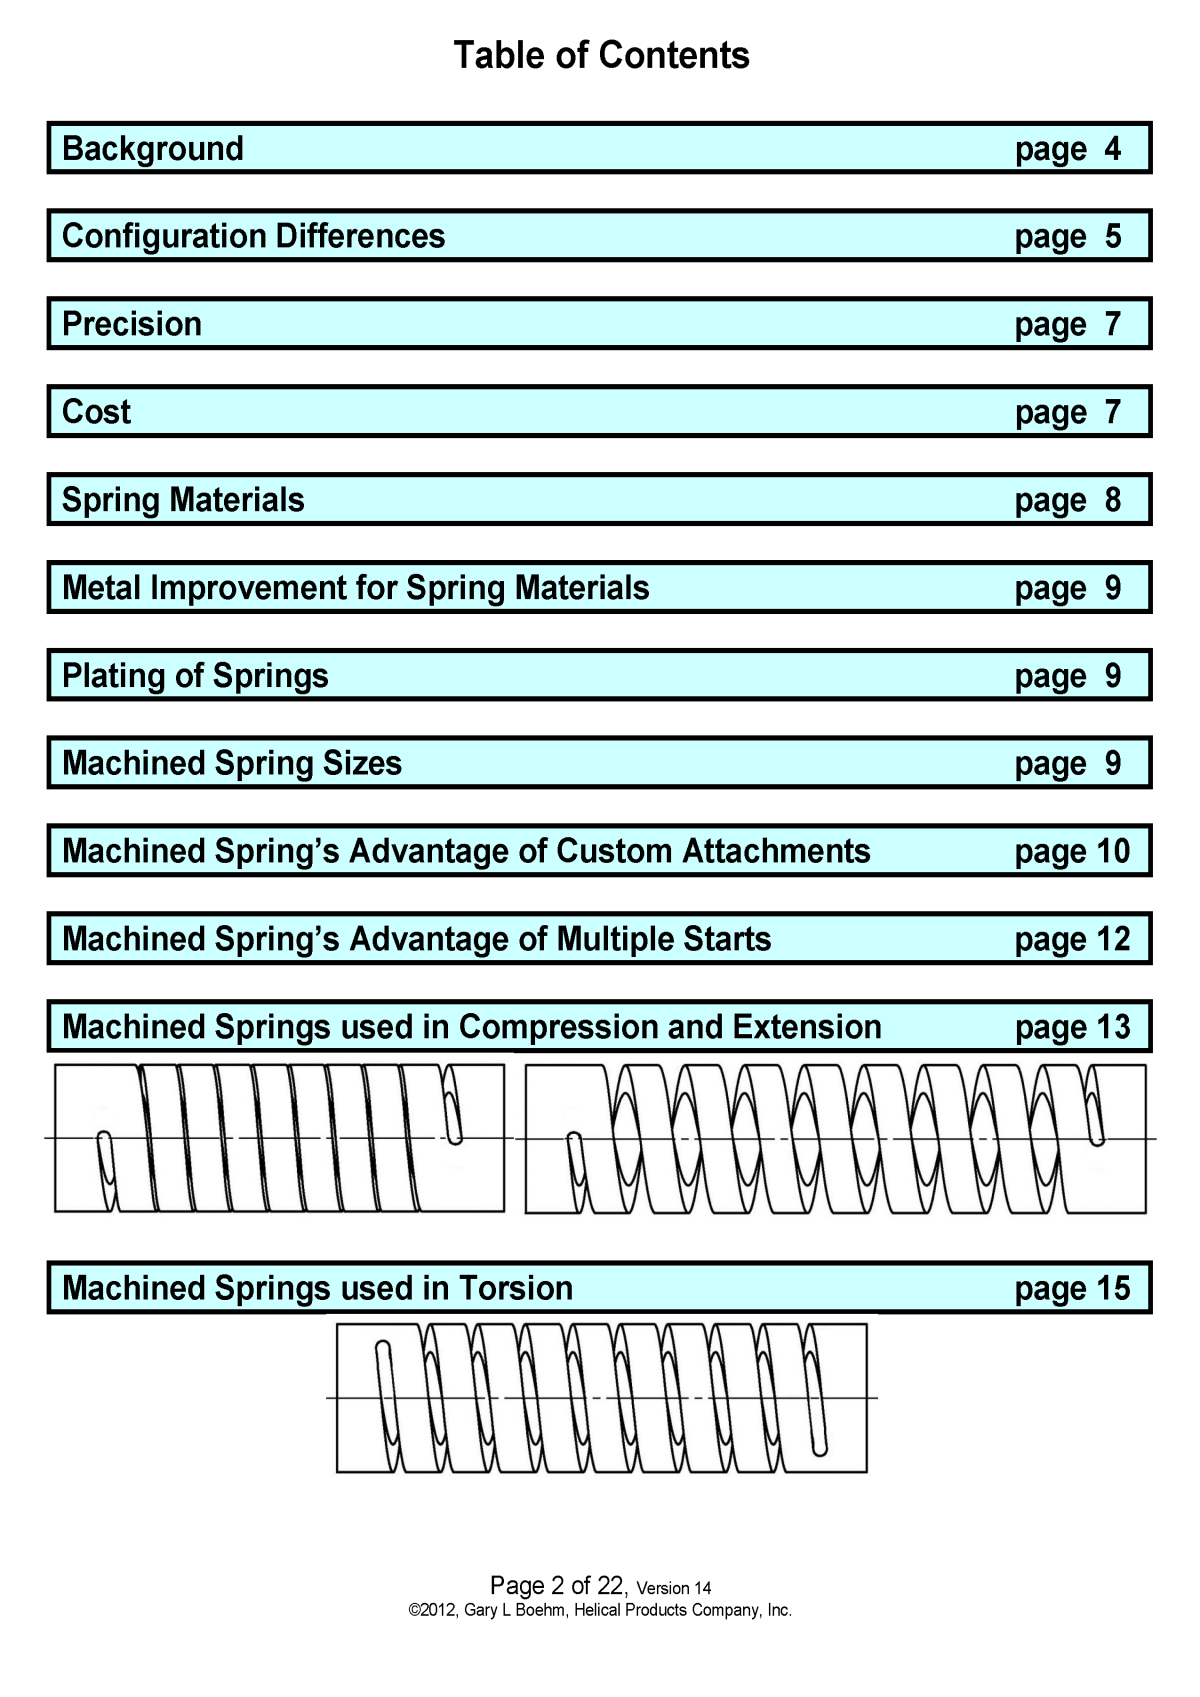 White Paper machined springs vs wound springs Page 22